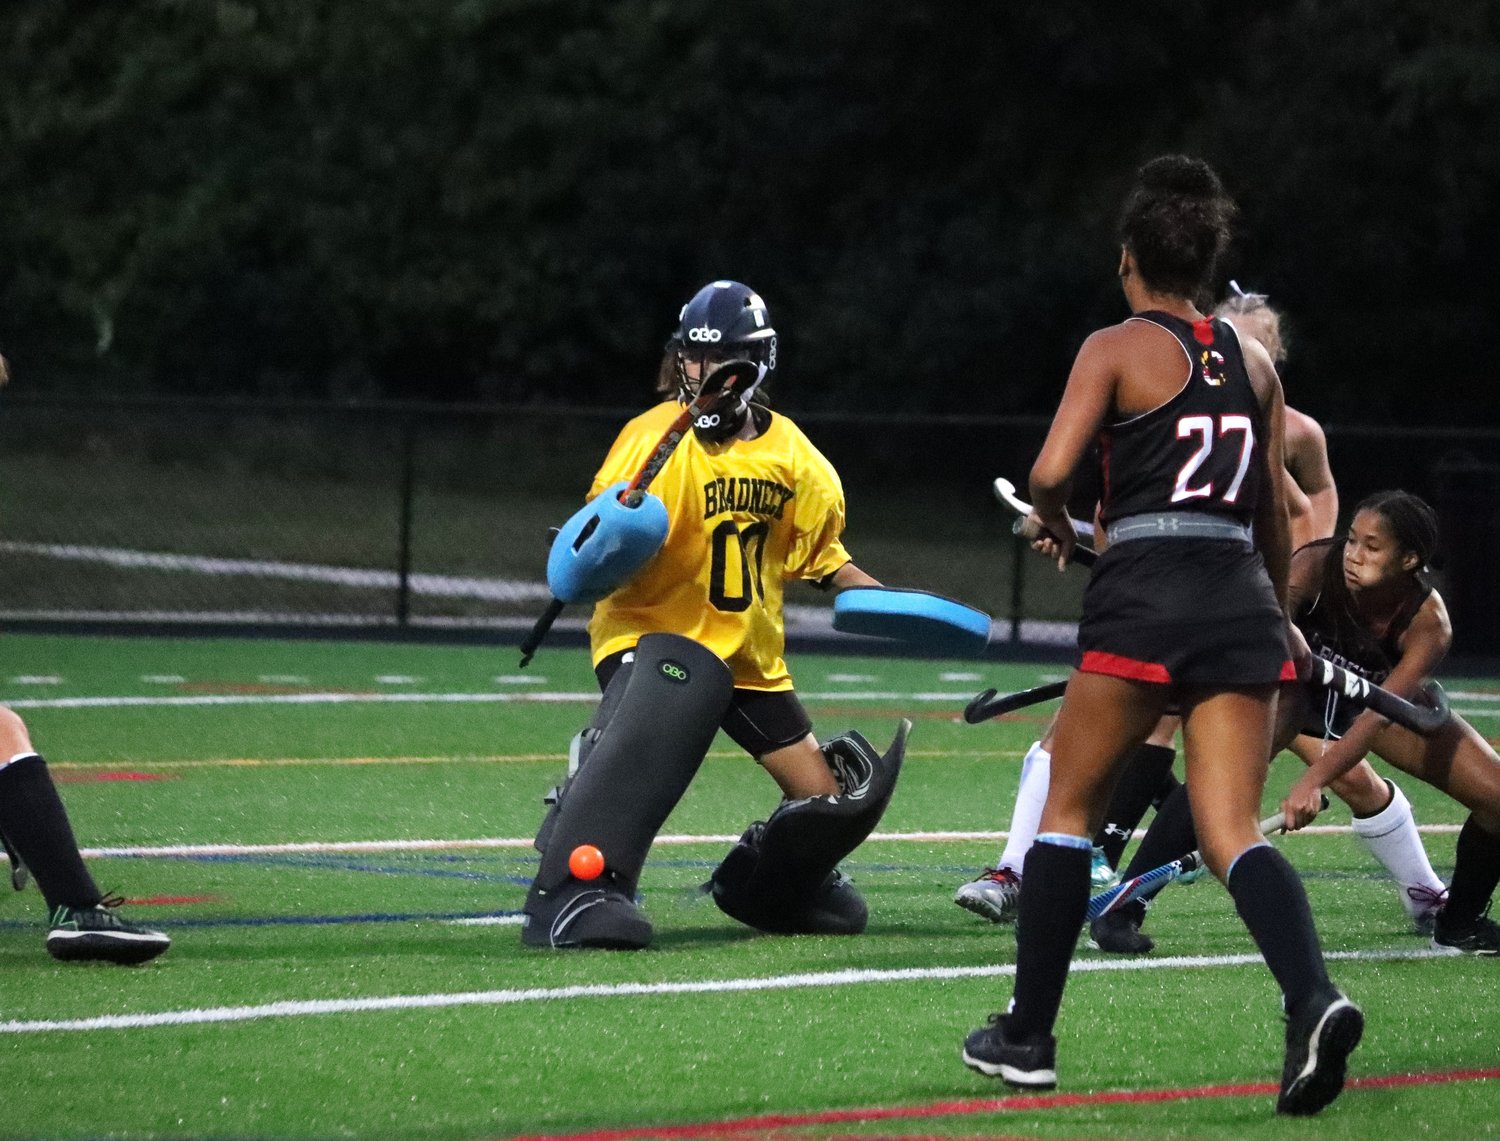 Mia Moody made four saves for Broadneck.